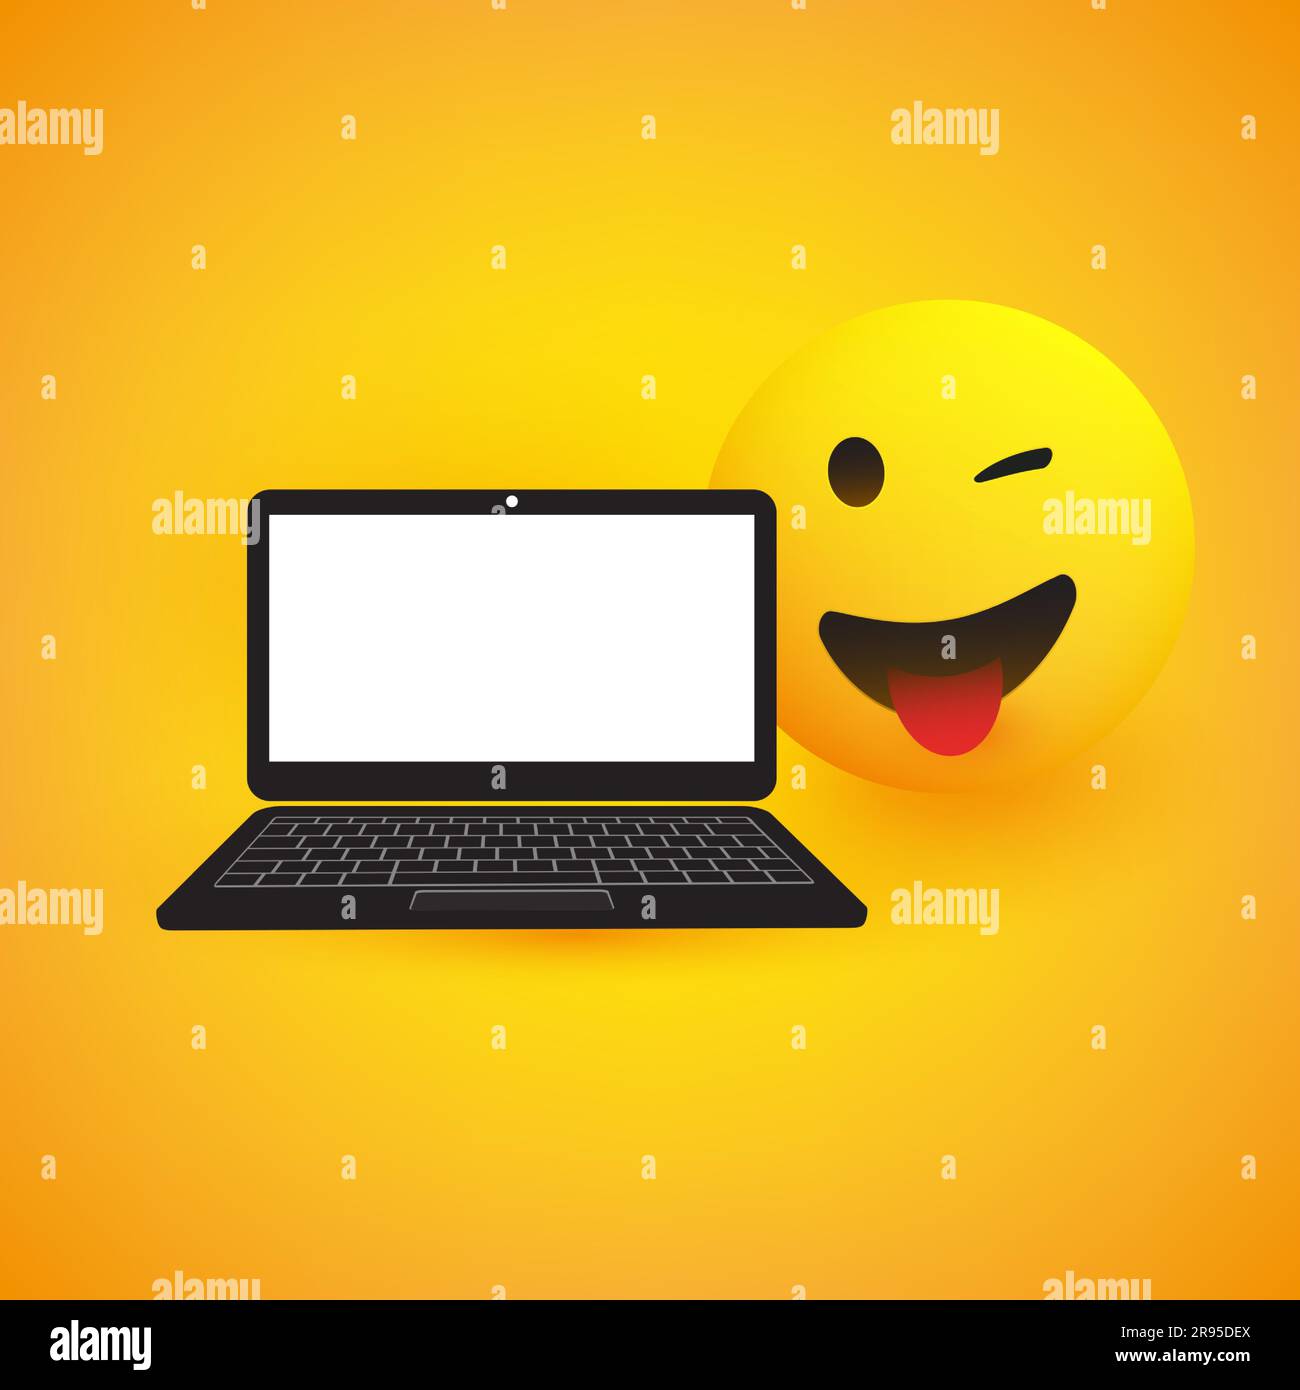 Emoji, Emoticon with Winking Eye and Laptop Computer on Yellow Background - Vector Design Stock Vector